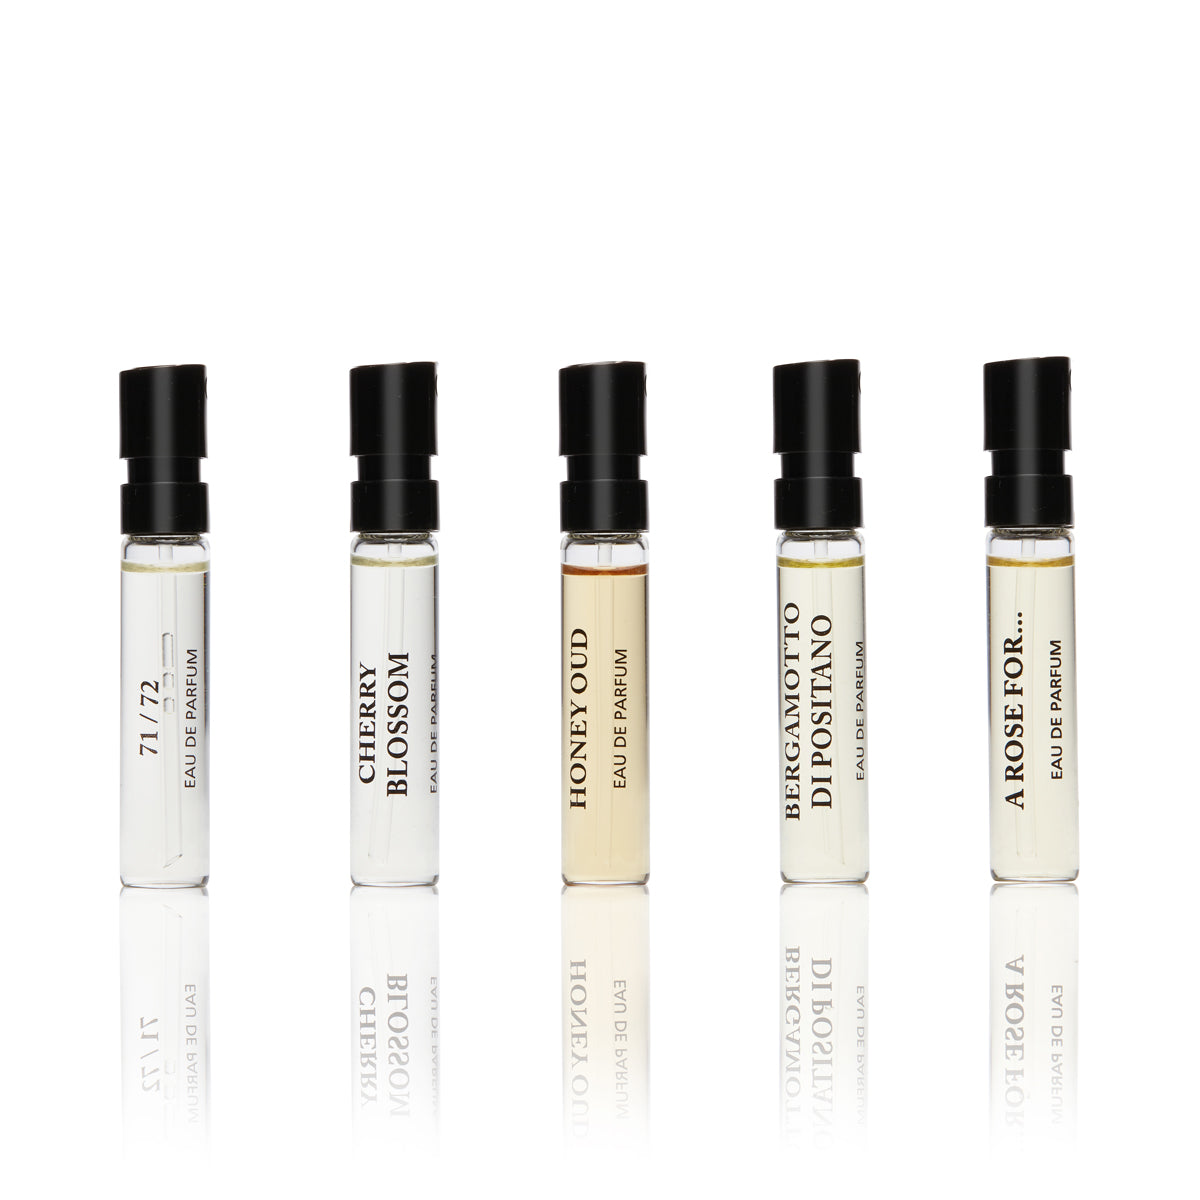 Five small clear glass vials with black writing on each, and black spray nozzles. containing the Private Discovery Collection